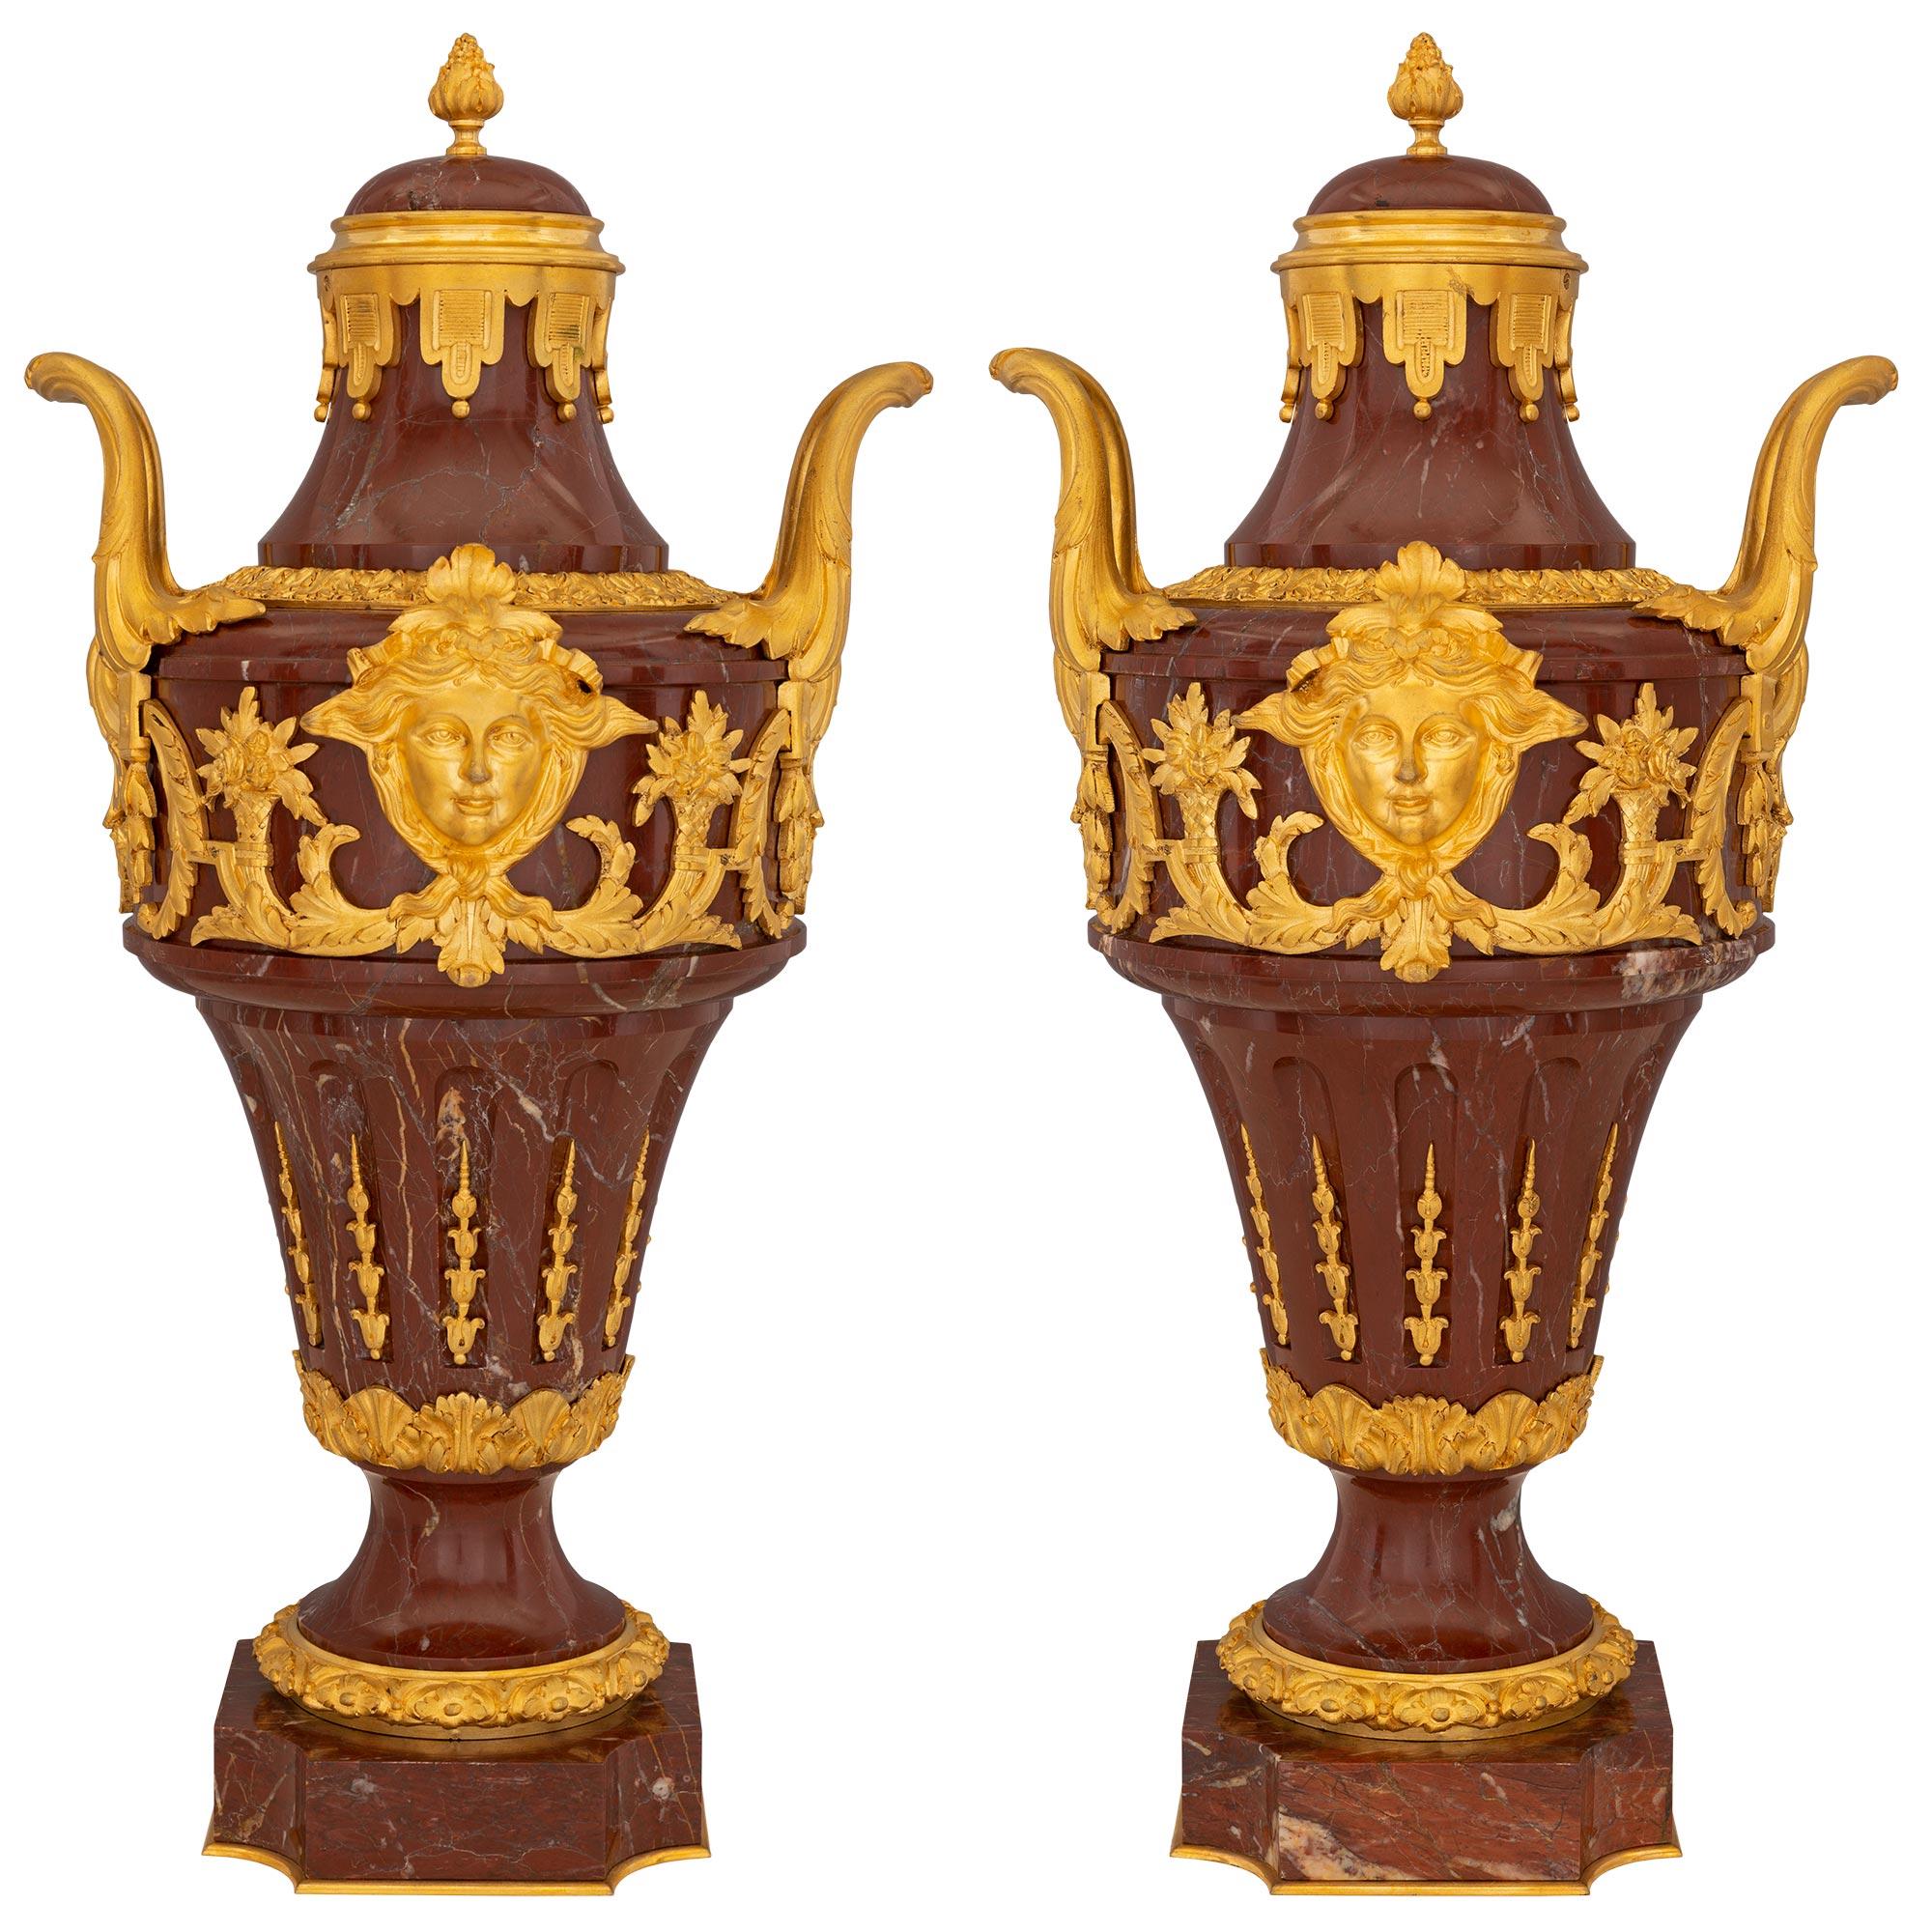 Pair of French 19th Century Louis XVI Style Rouge Marble and Ormolu Urns